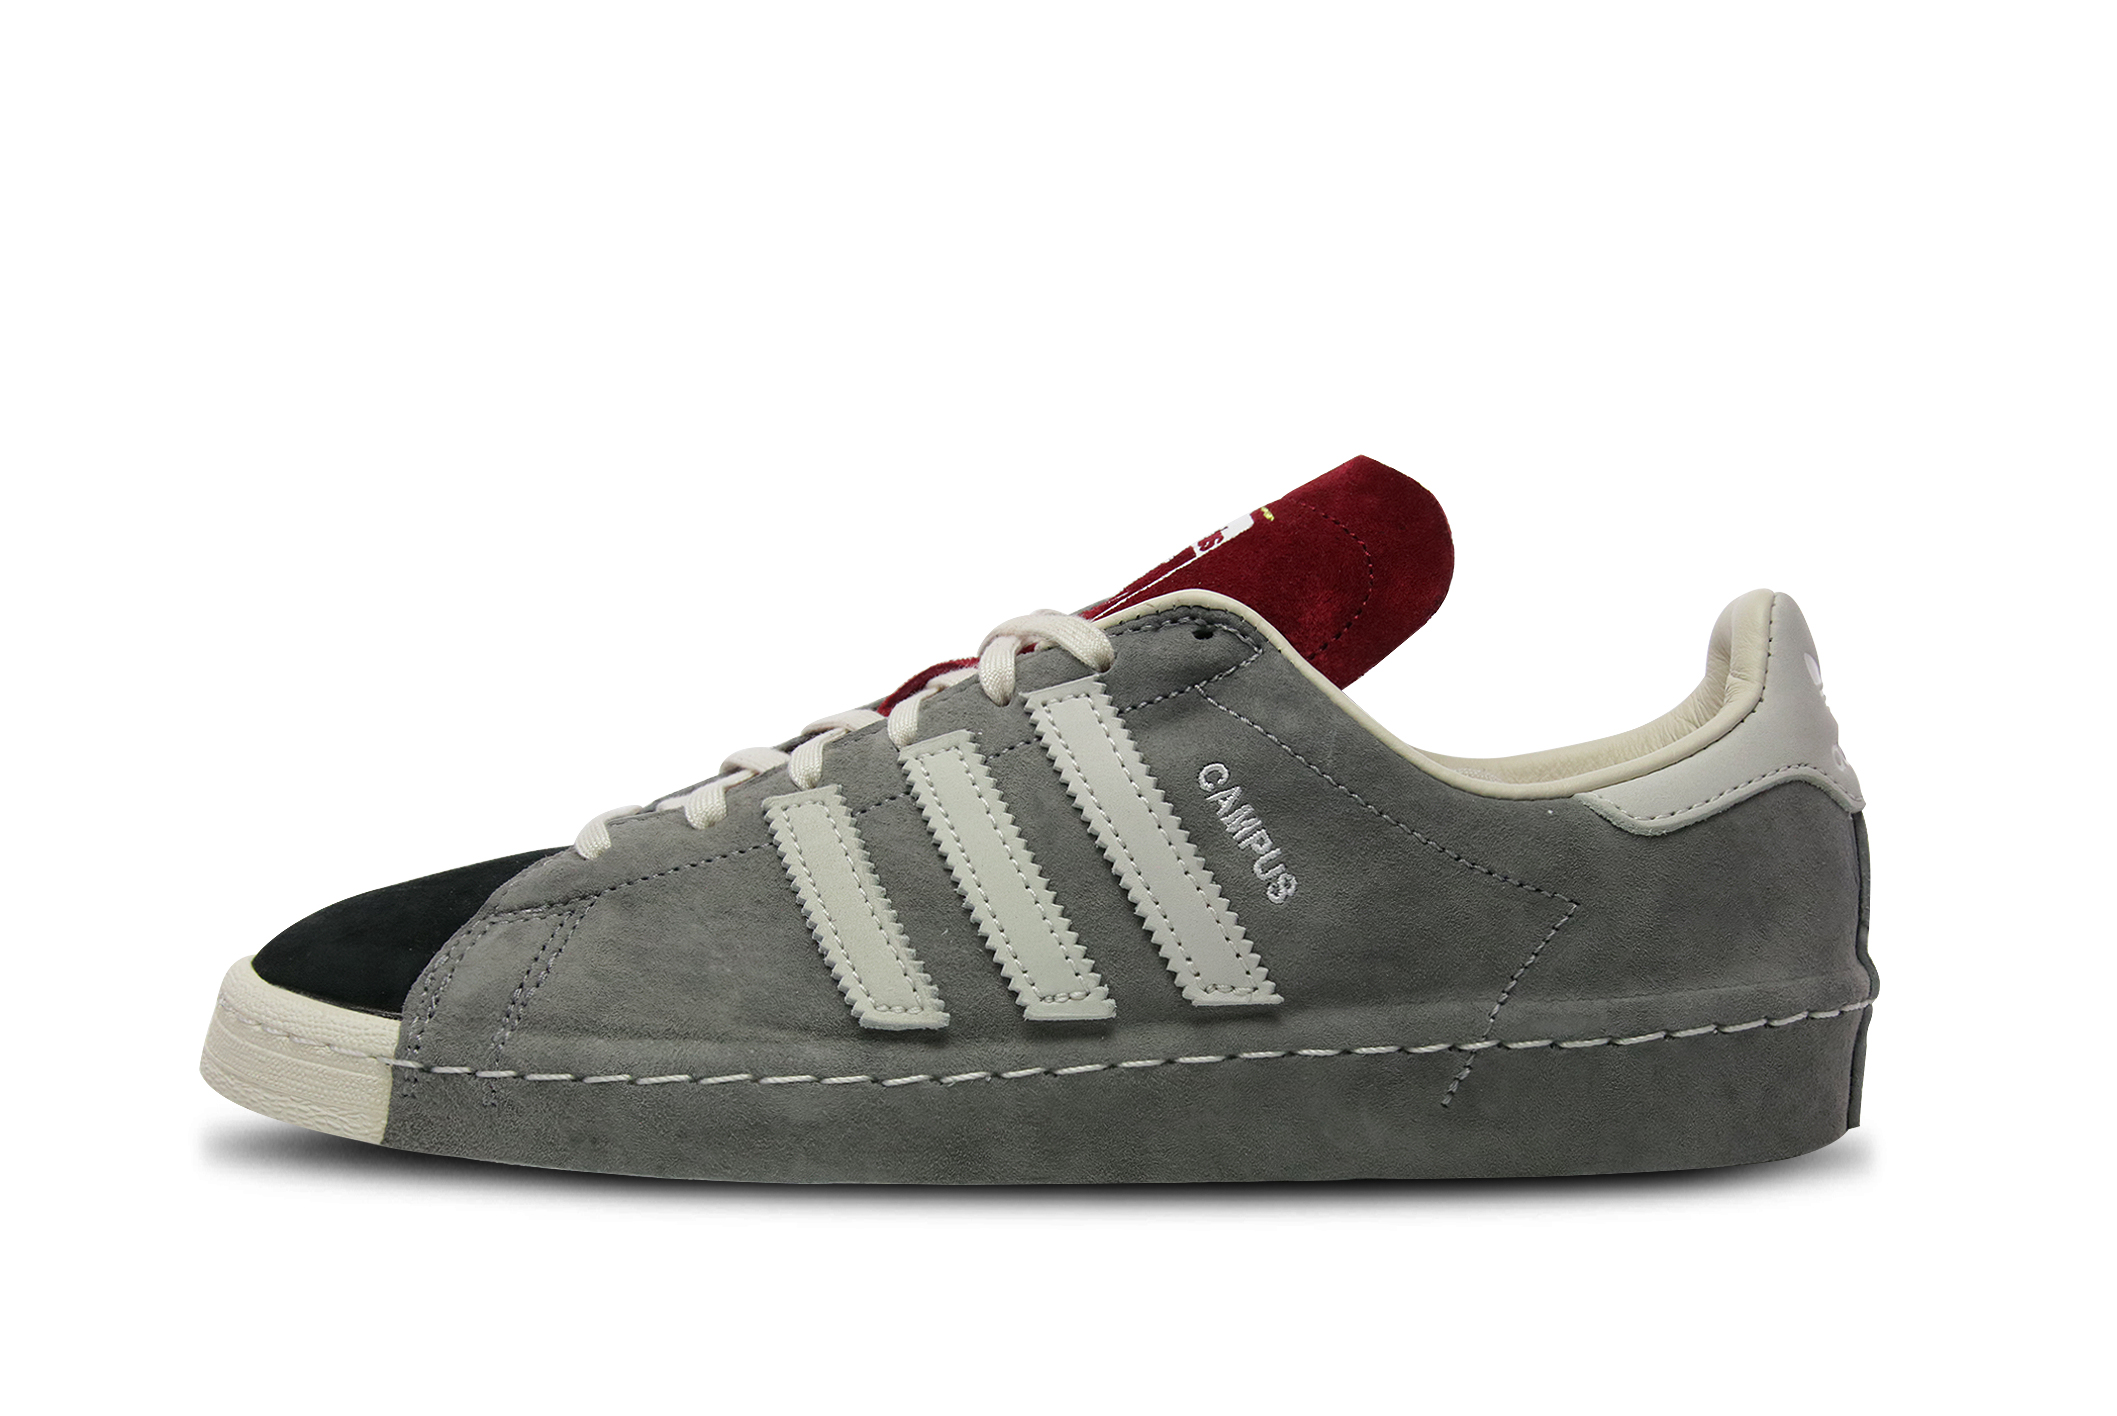 adidas campus 80s archive edition sneaker